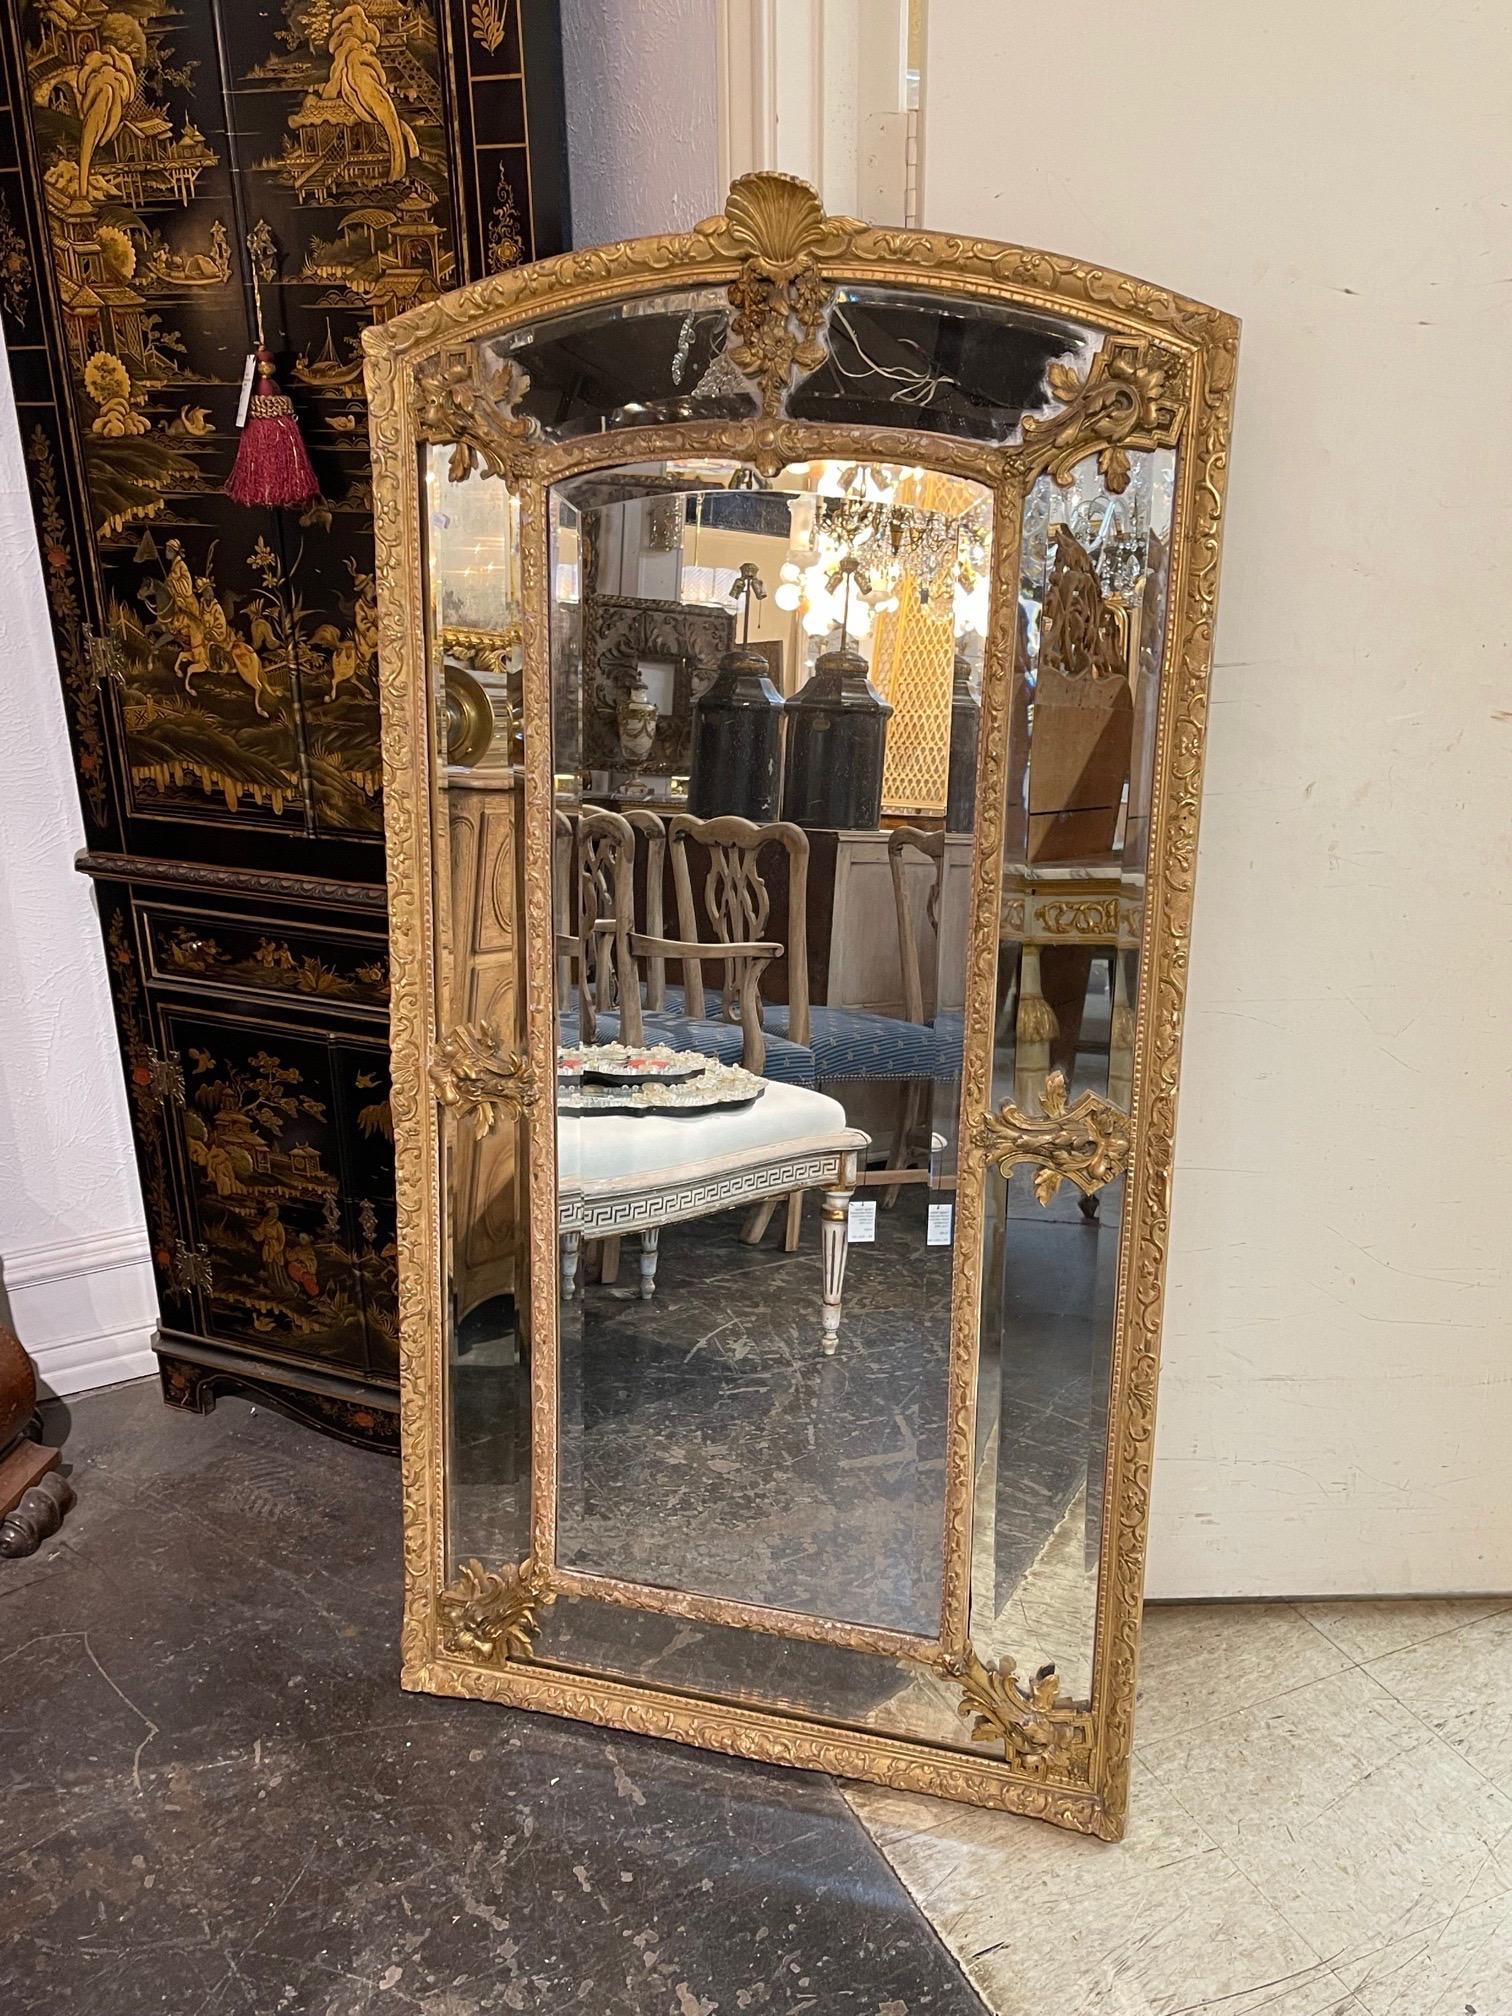 Elegant 19th century French Louis XVI style giltwood cushion mirror with glass panels. Very fine carving including a shell at the top. Stunning!!